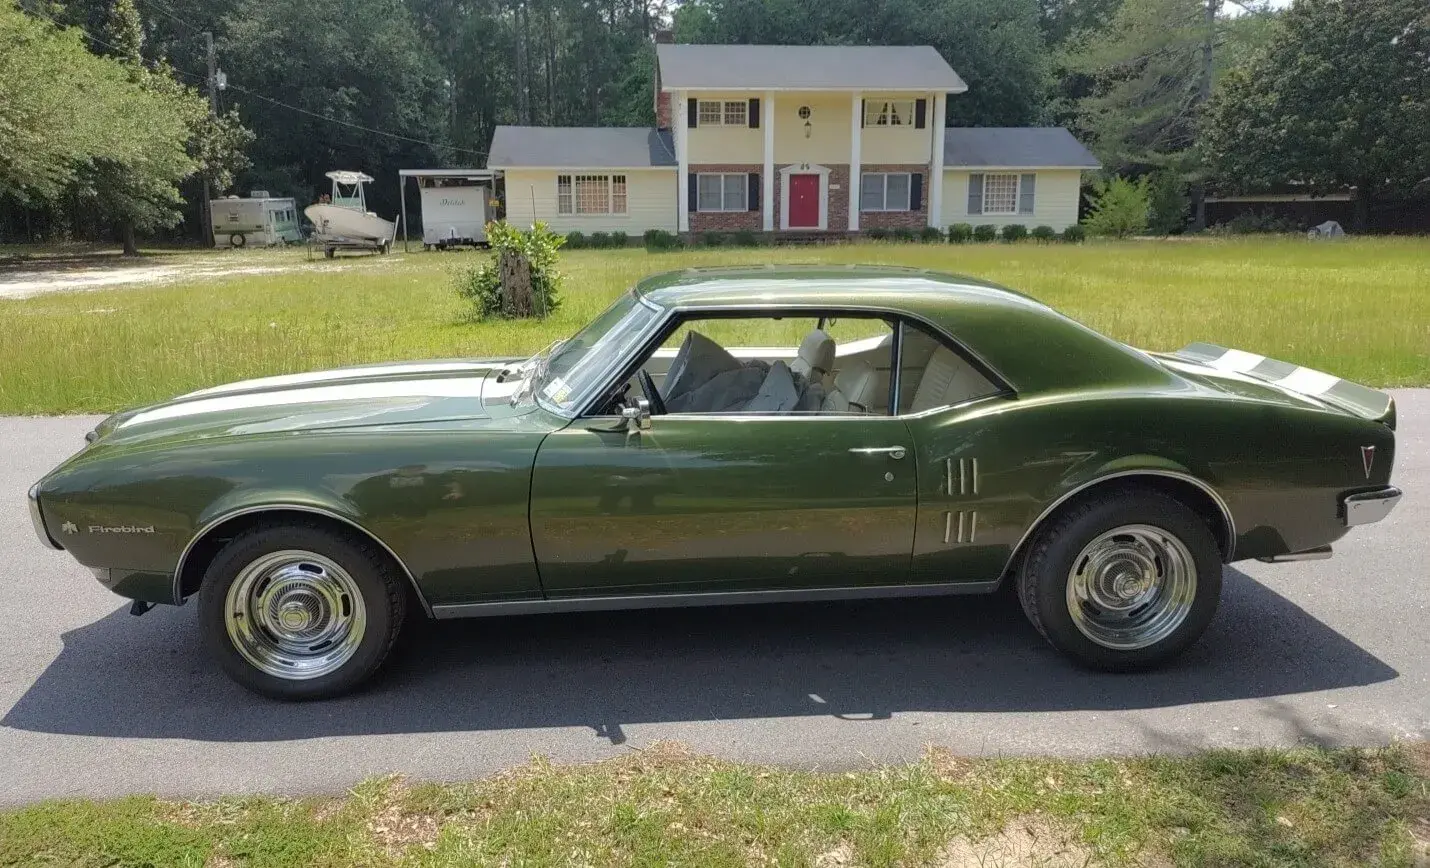 Green firebird parked in front of a house